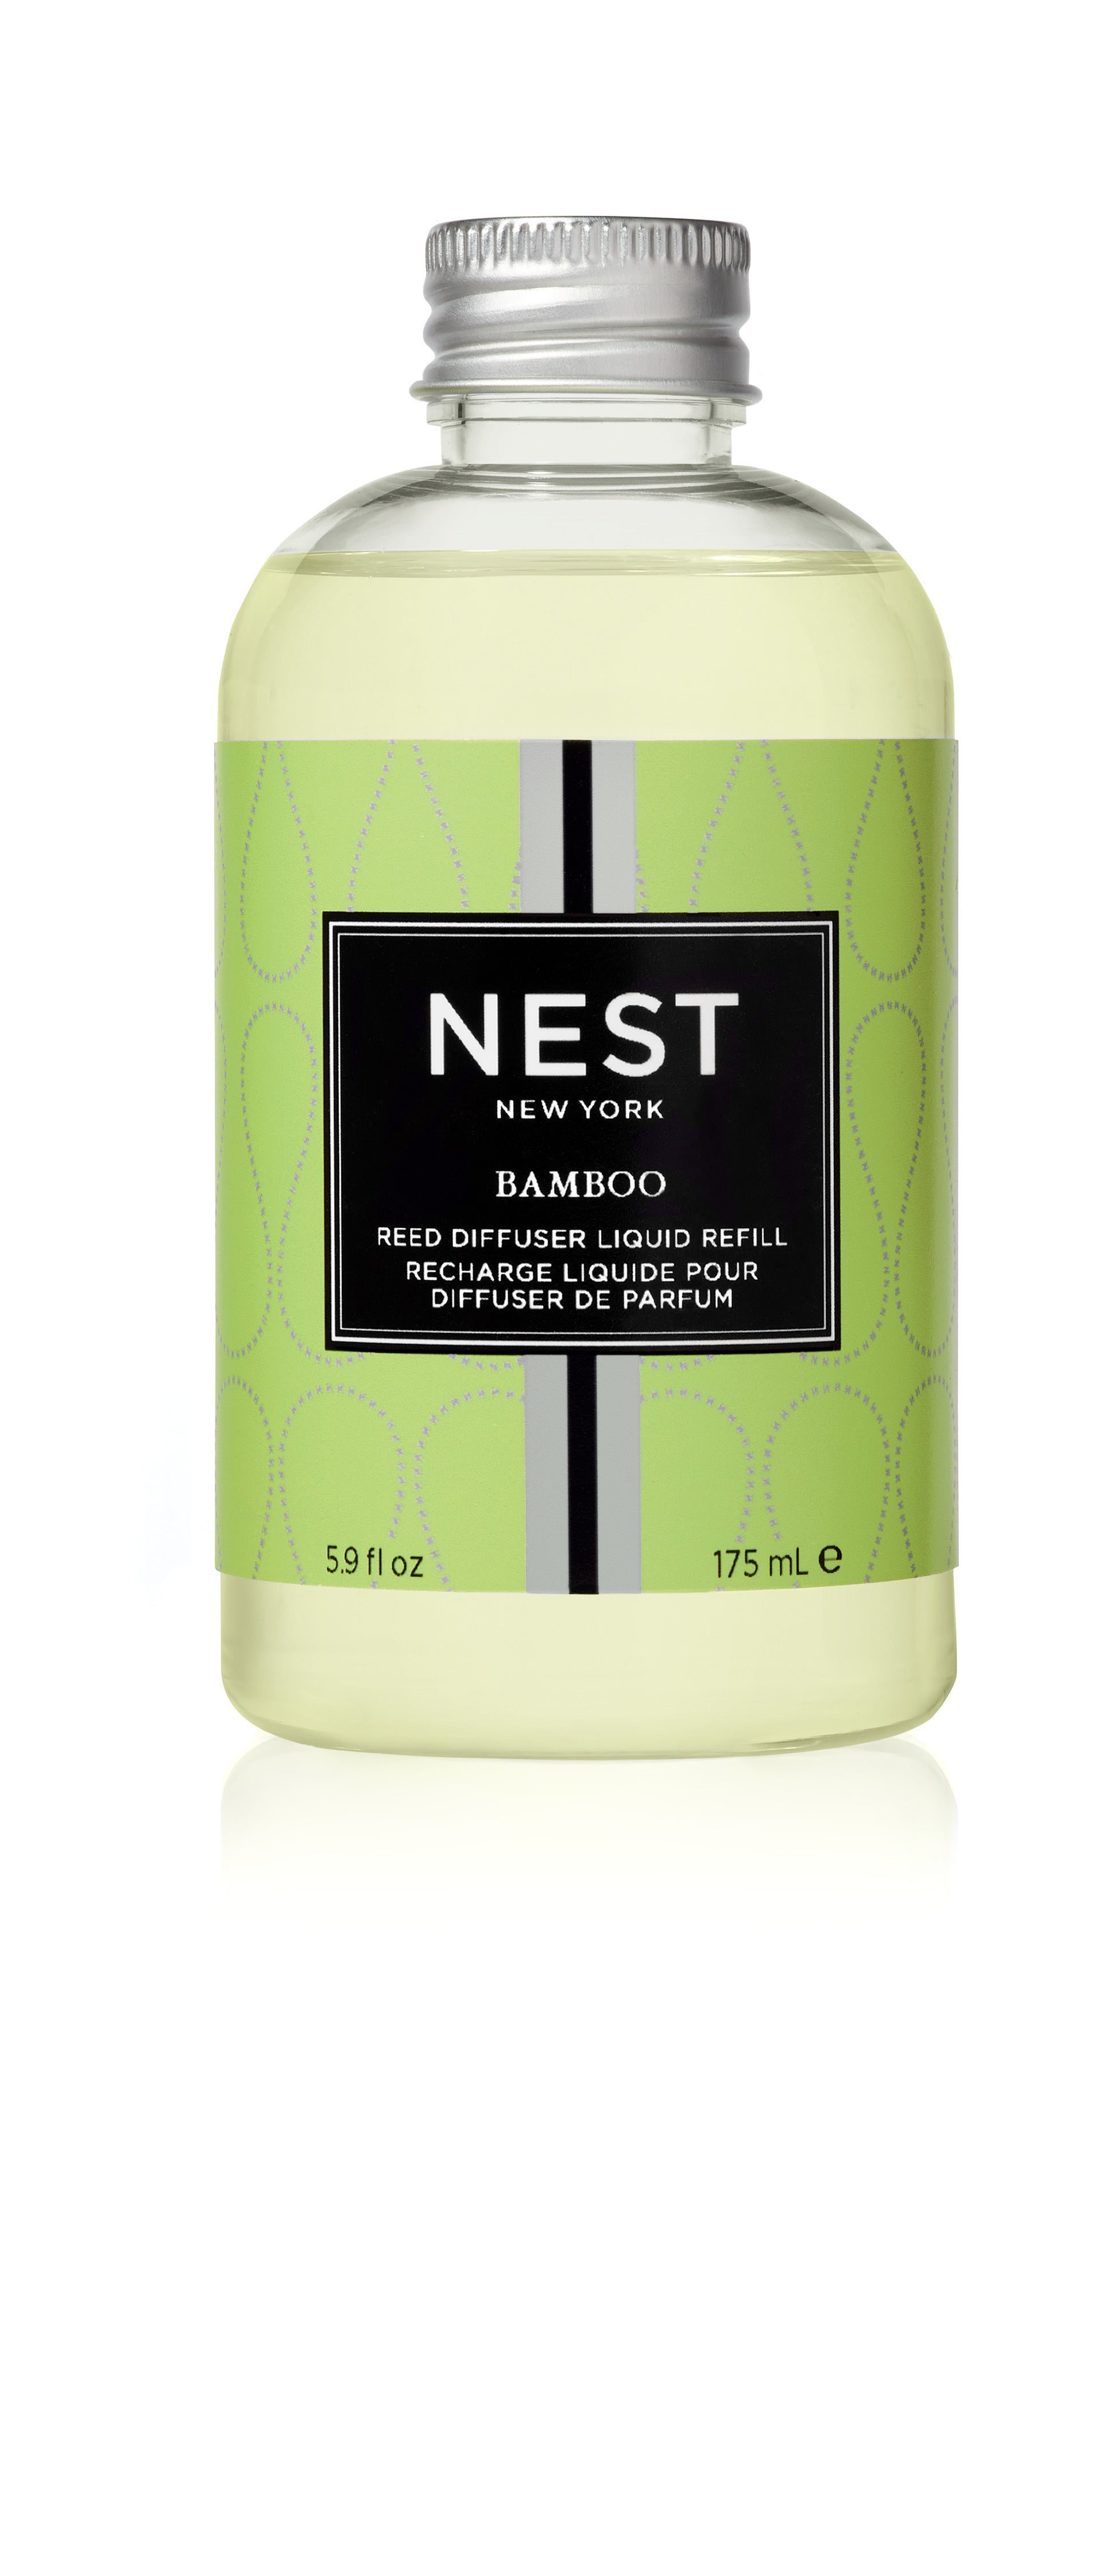 NEST New York Reed Diffuser Refill - Bamboo